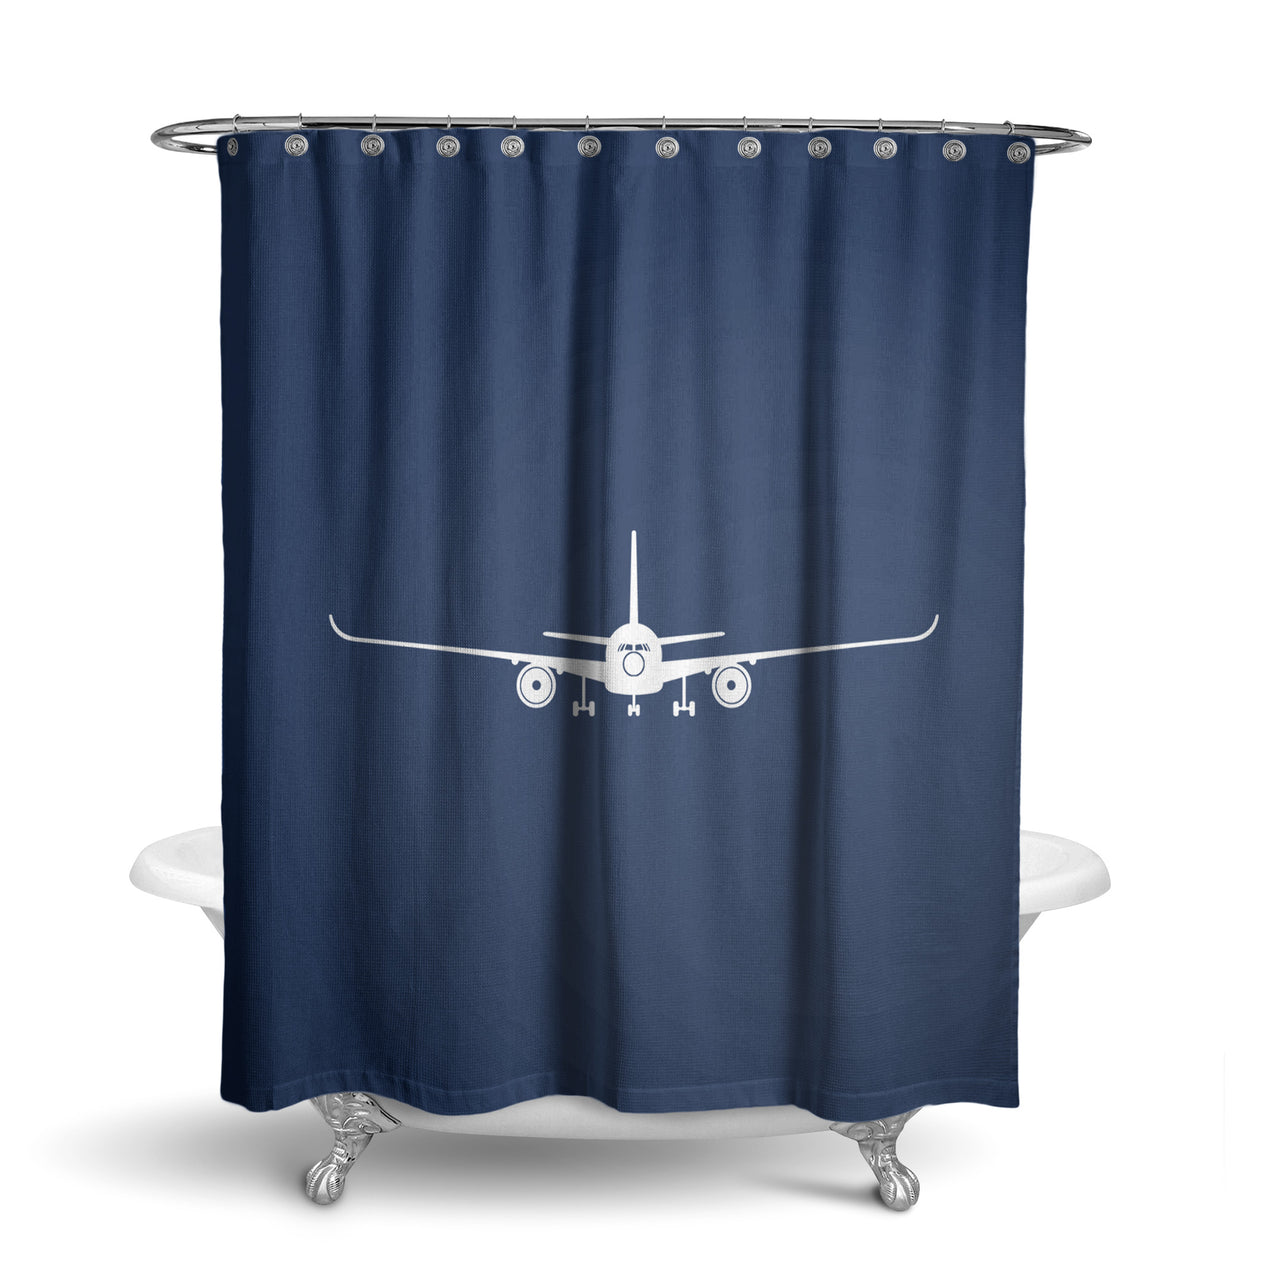 Airbus A350 Silhouette Designed Shower Curtains